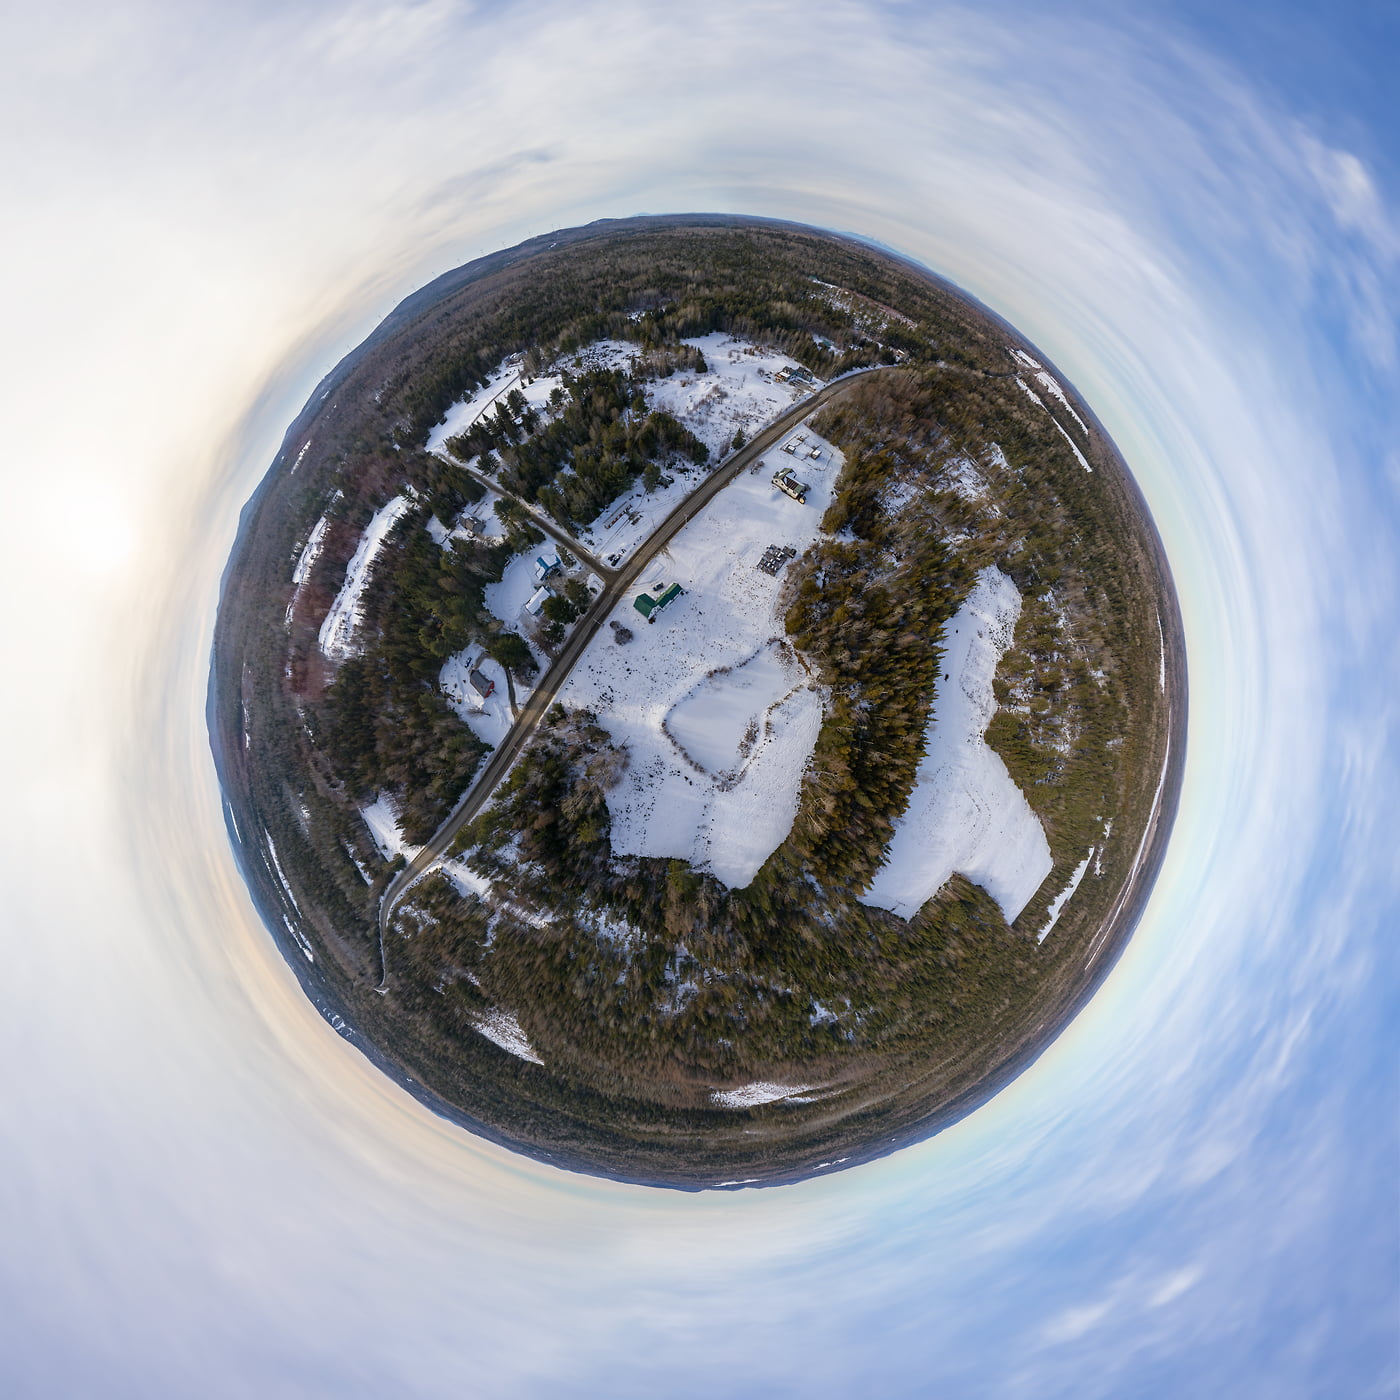 431 megapixels! A very high resolution, large-format VAST photo of Lee, Maine; fine art aerial 360-degree panorama photograph created by Aaron Priest in New England.